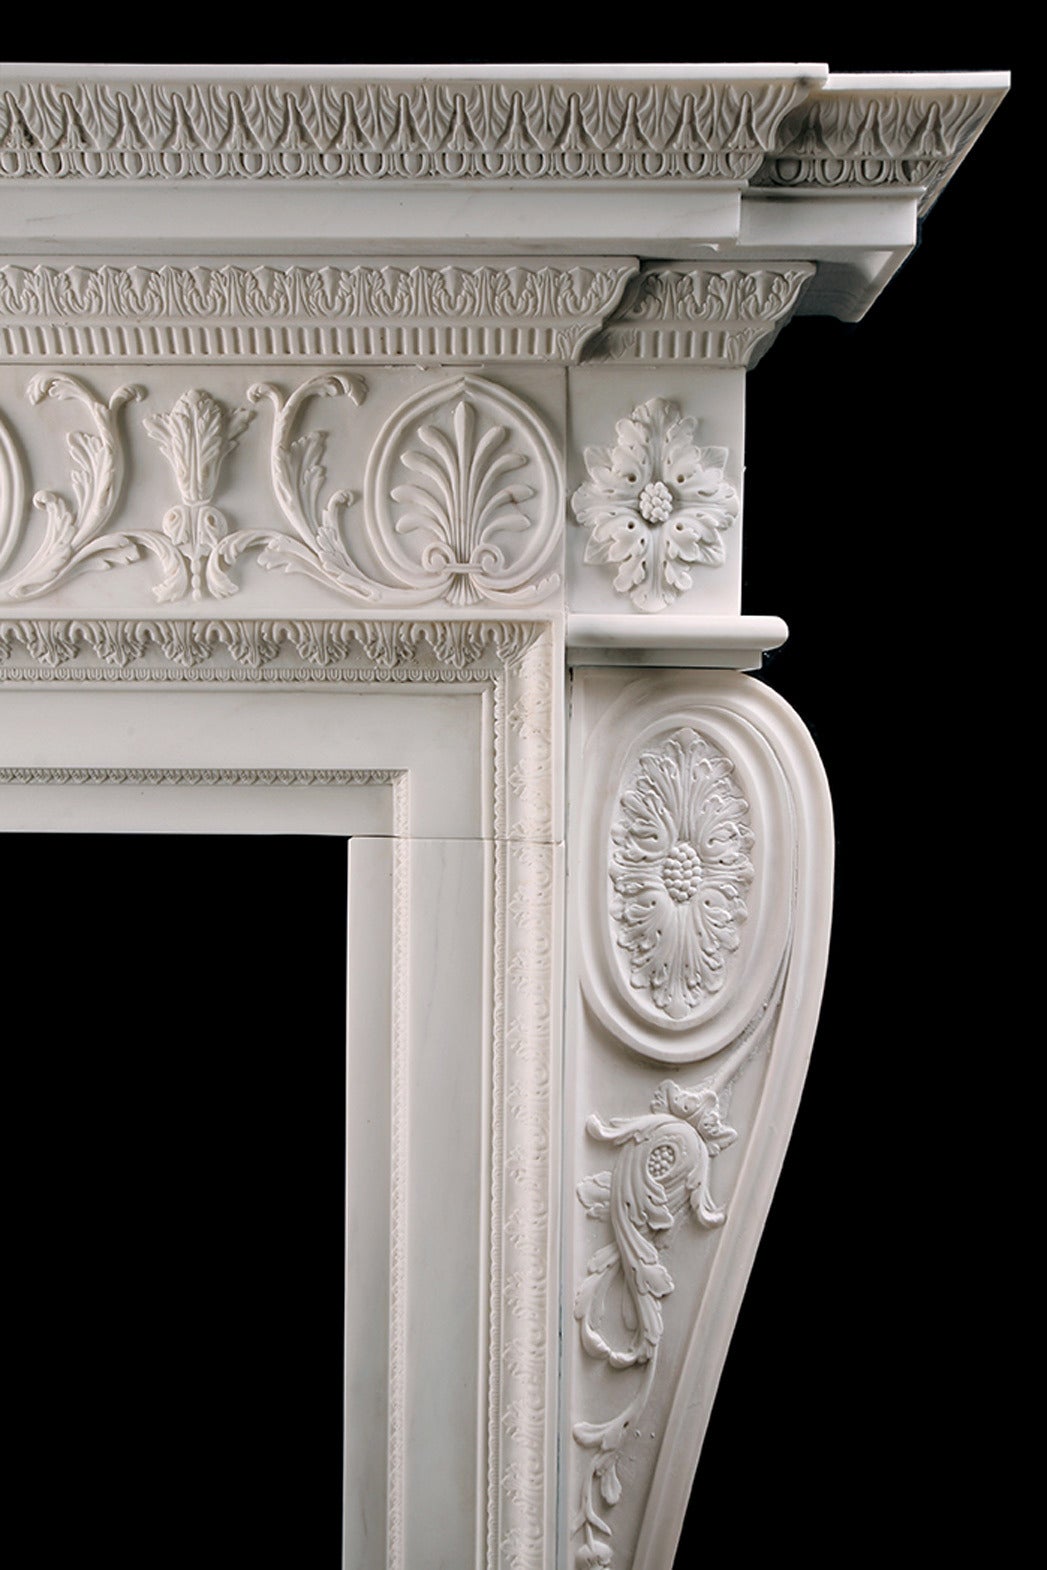 This marble chimneypiece has been copied from an original by the great Scottish architect Robert Adam. It takes many months to produce and has all the quality and refinement of the original. Its Neoclassicism at its best, as you would expect from